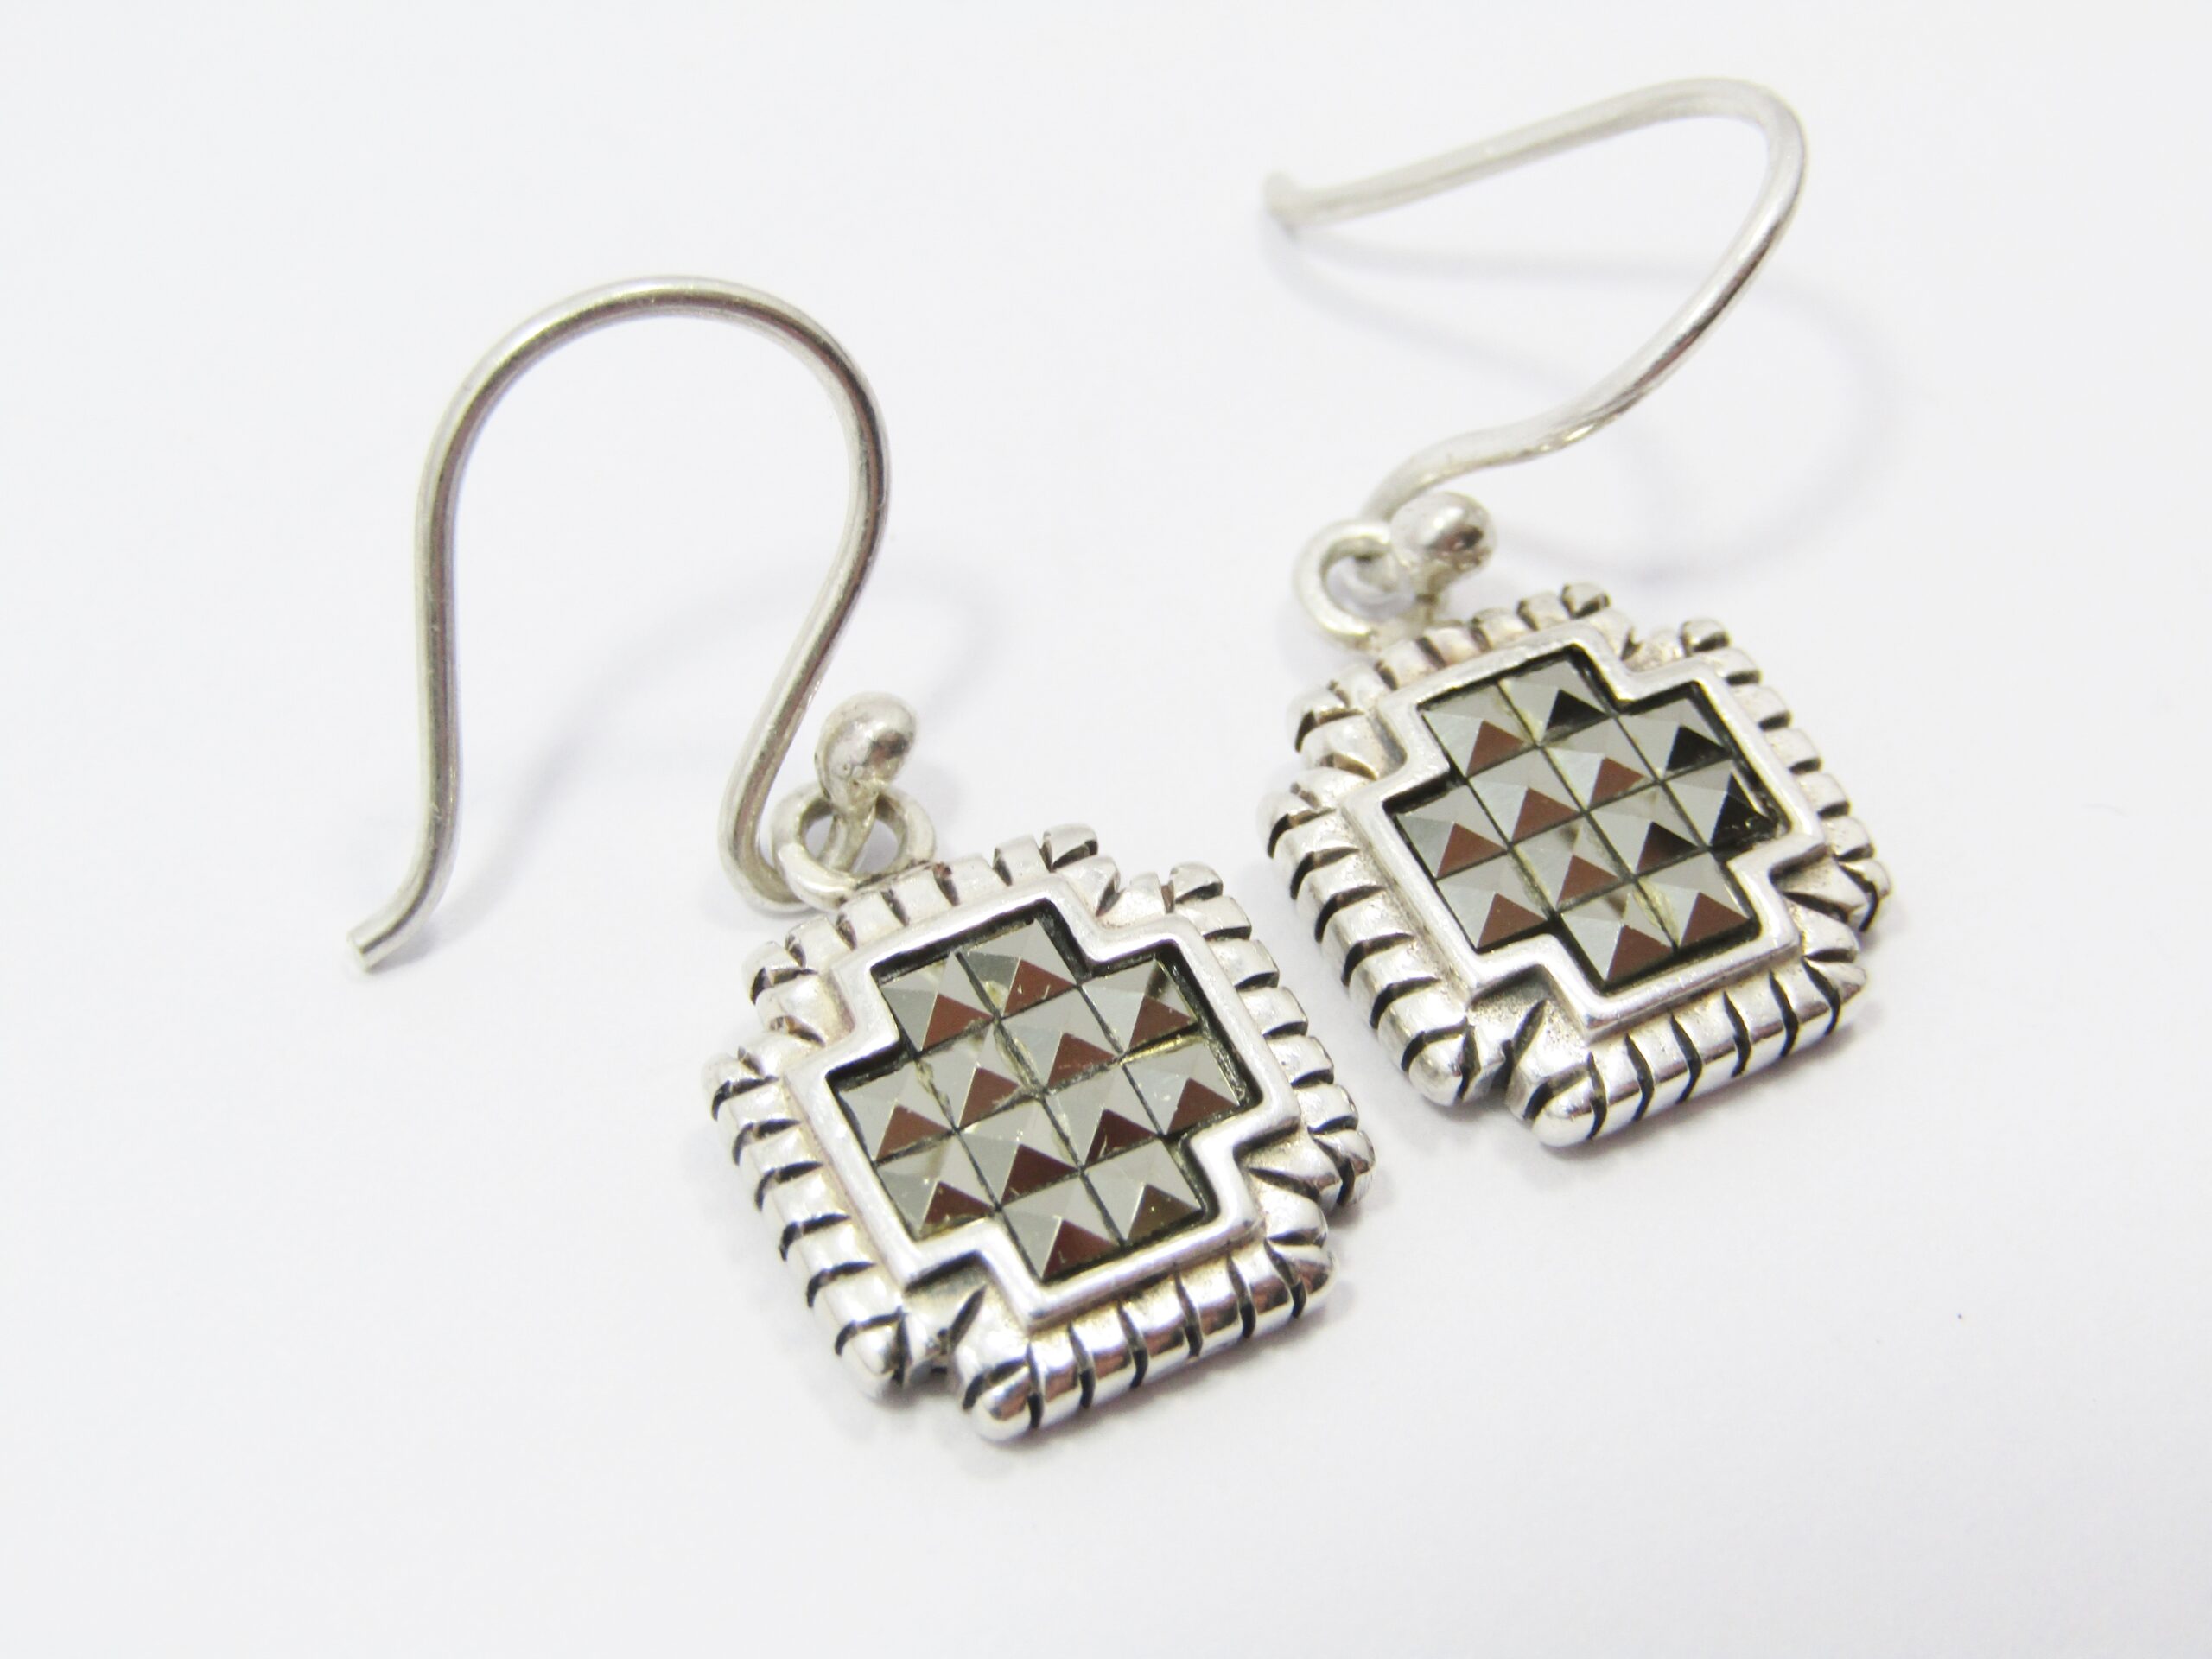 A Gorgeous Pair of Marcasite Dangling Earrings in Sterling Silver